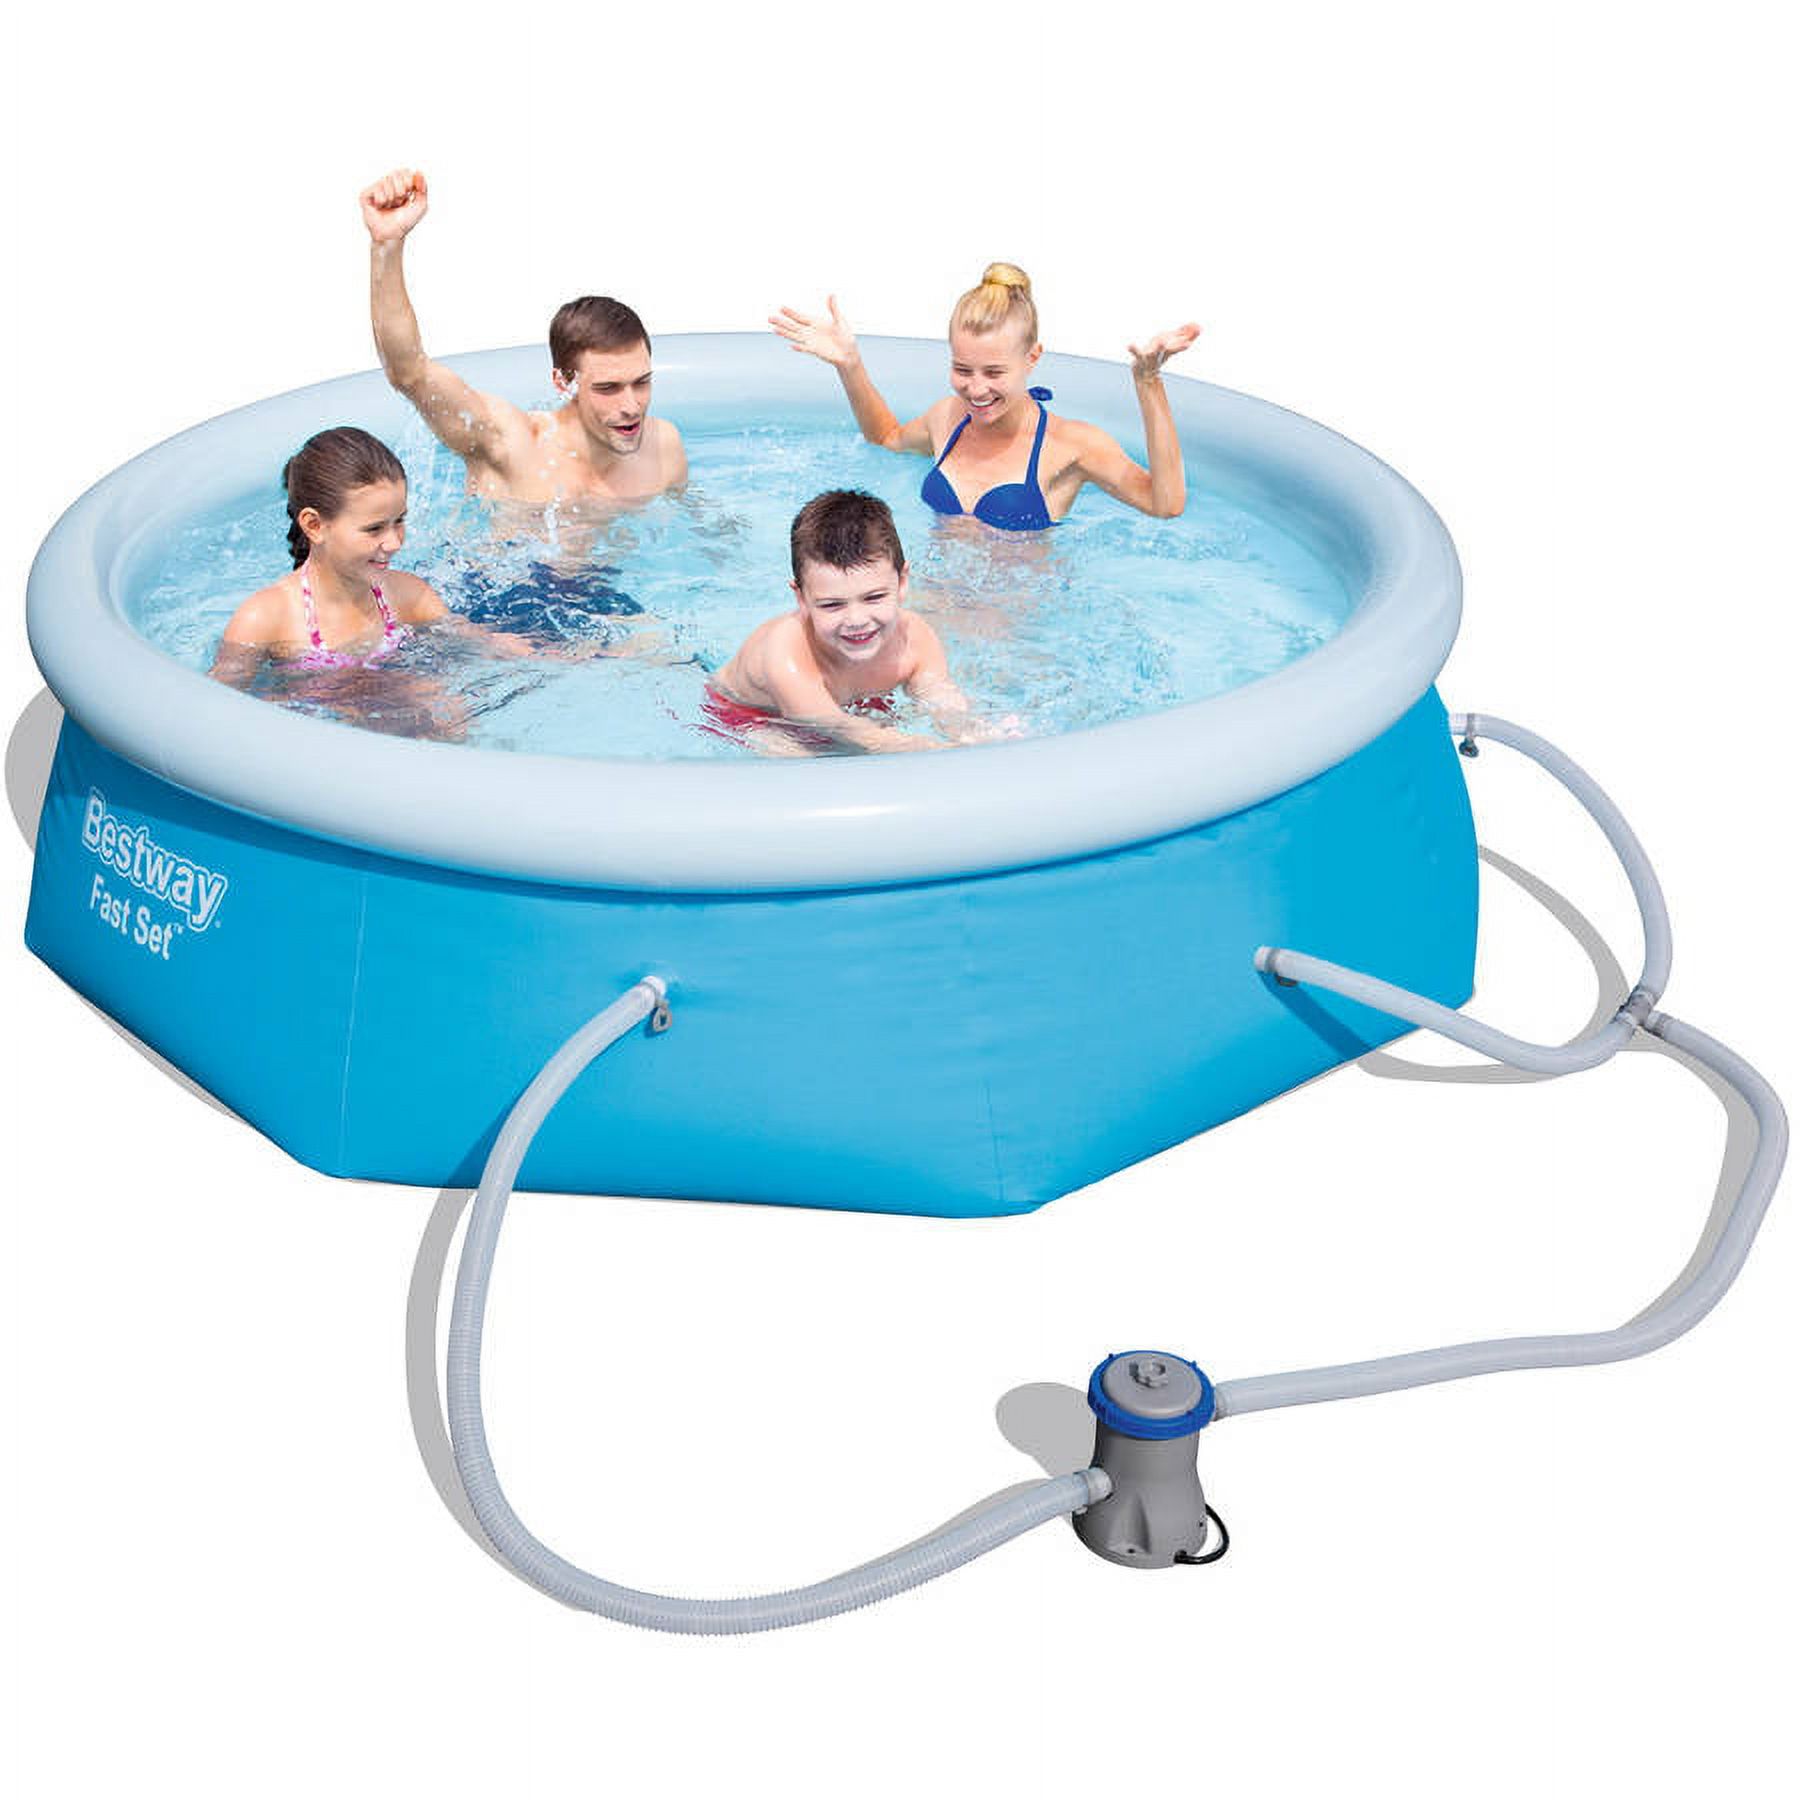 Bestway Fast Set 8' x 26" Swimming Pool Set with Filter Pump - image 4 of 5